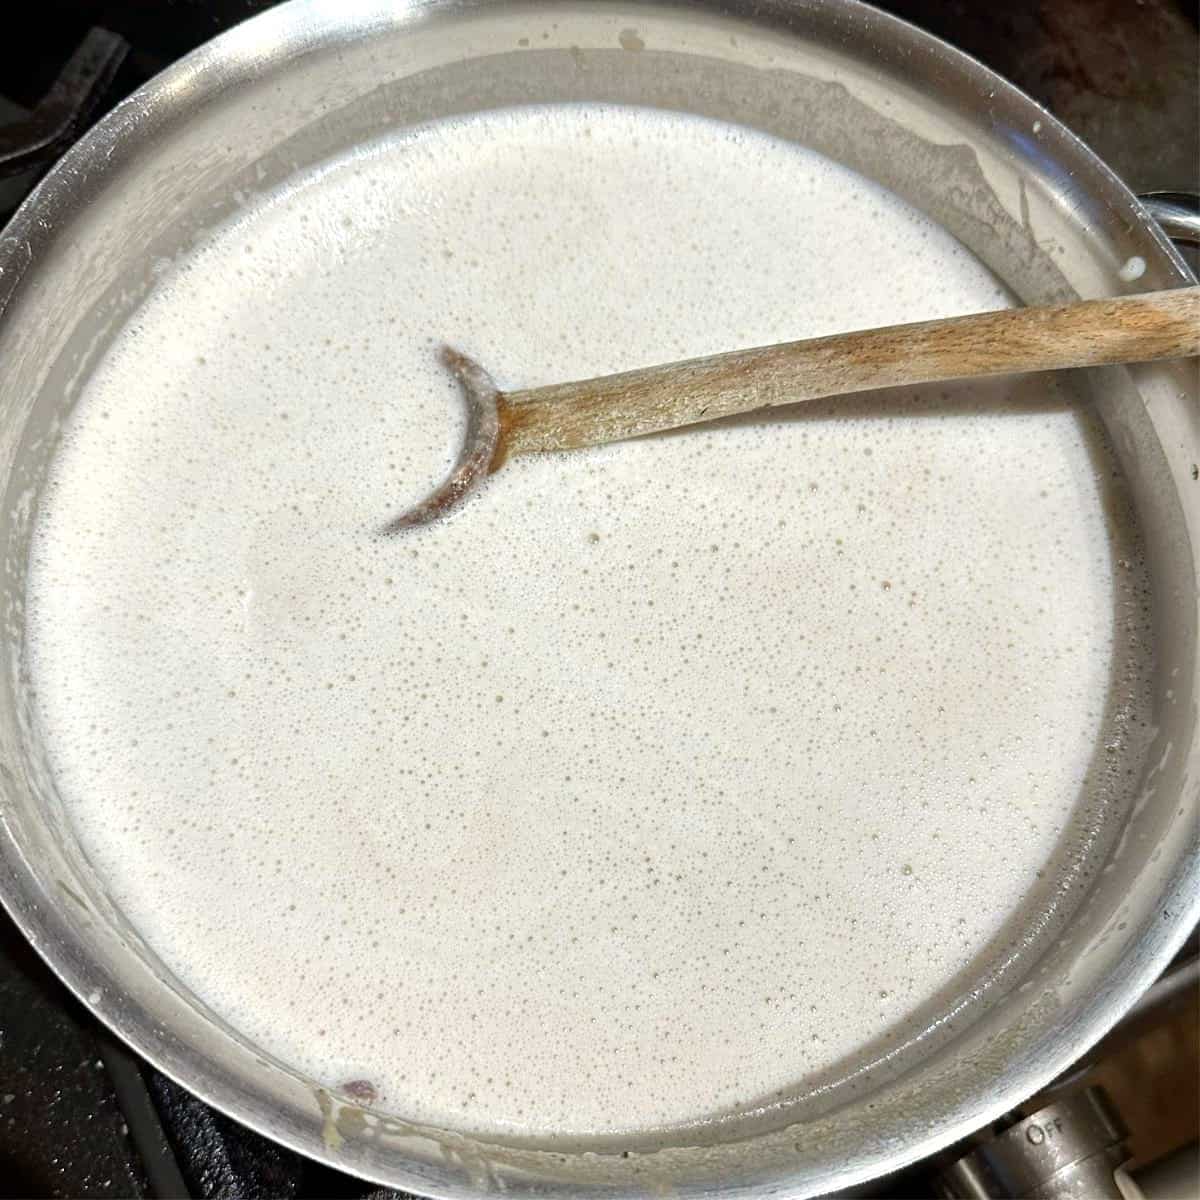 Cashew milk added to saucepan with ladle.